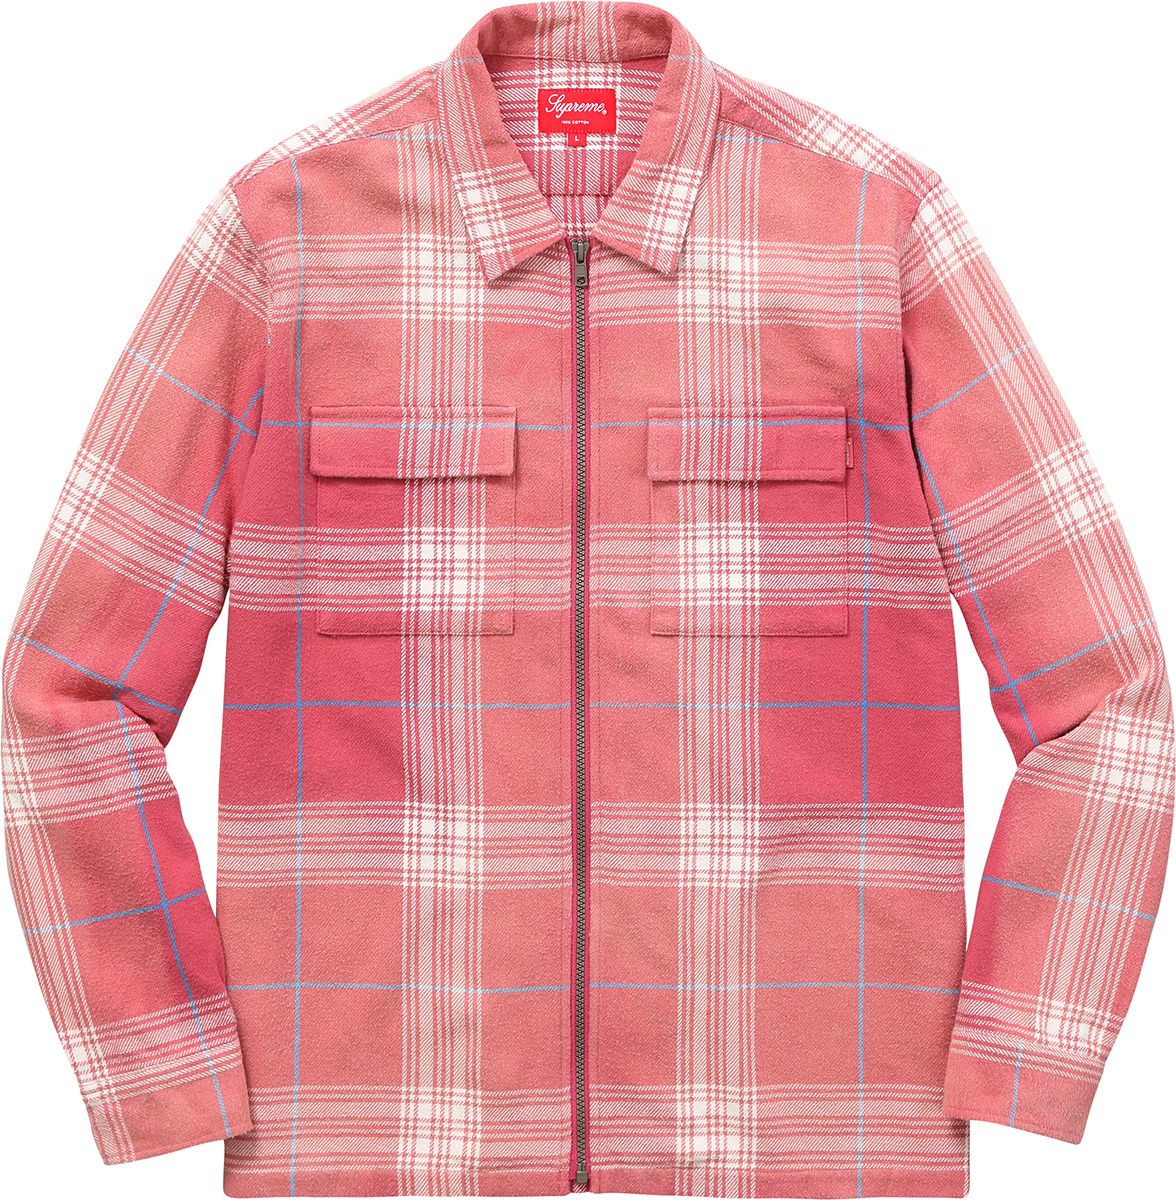 Faded Plaid Flannel Zip Up Shirt - Spring/Summer 2017 Preview